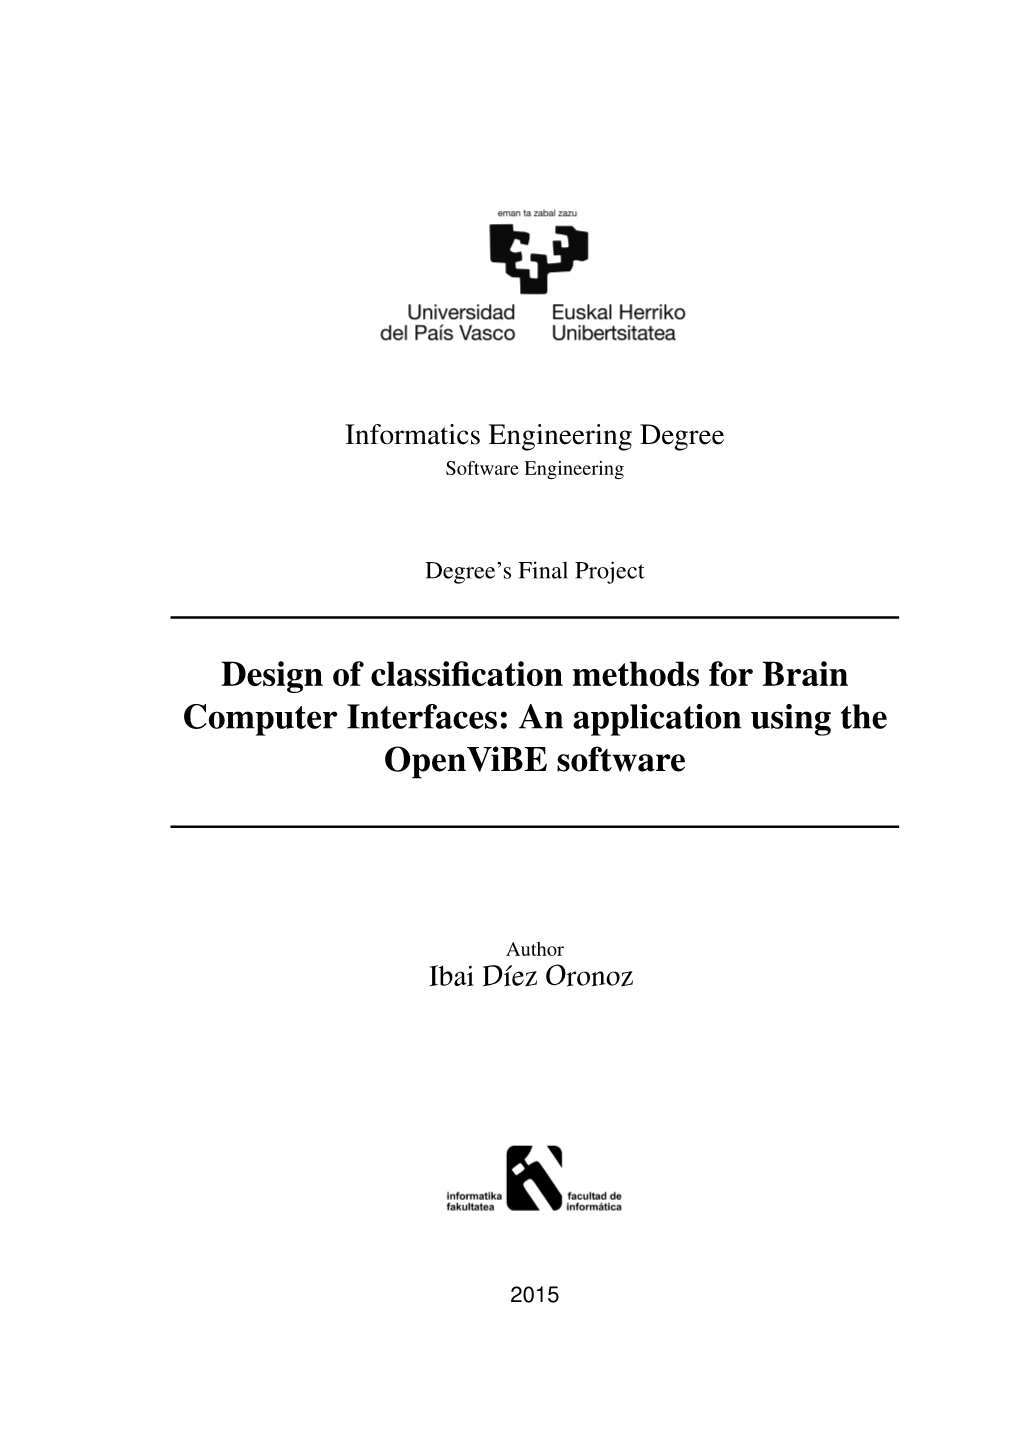 Design of Classification Methods for Brain Computer Interfaces: An